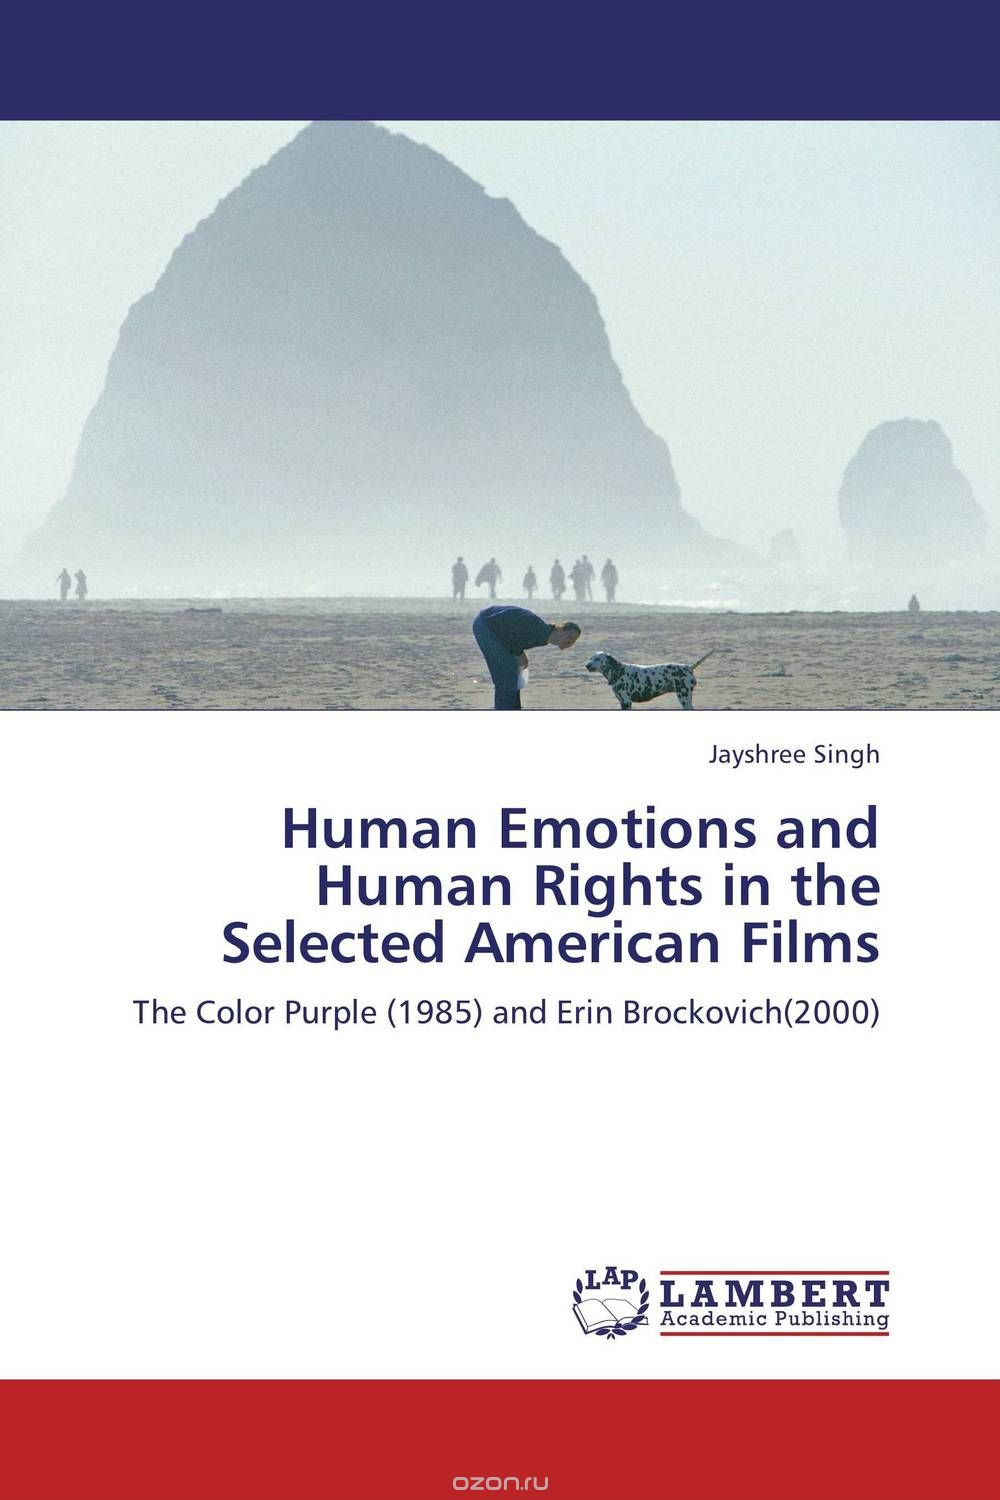 Human Emotions and Human Rights in the Selected American Films